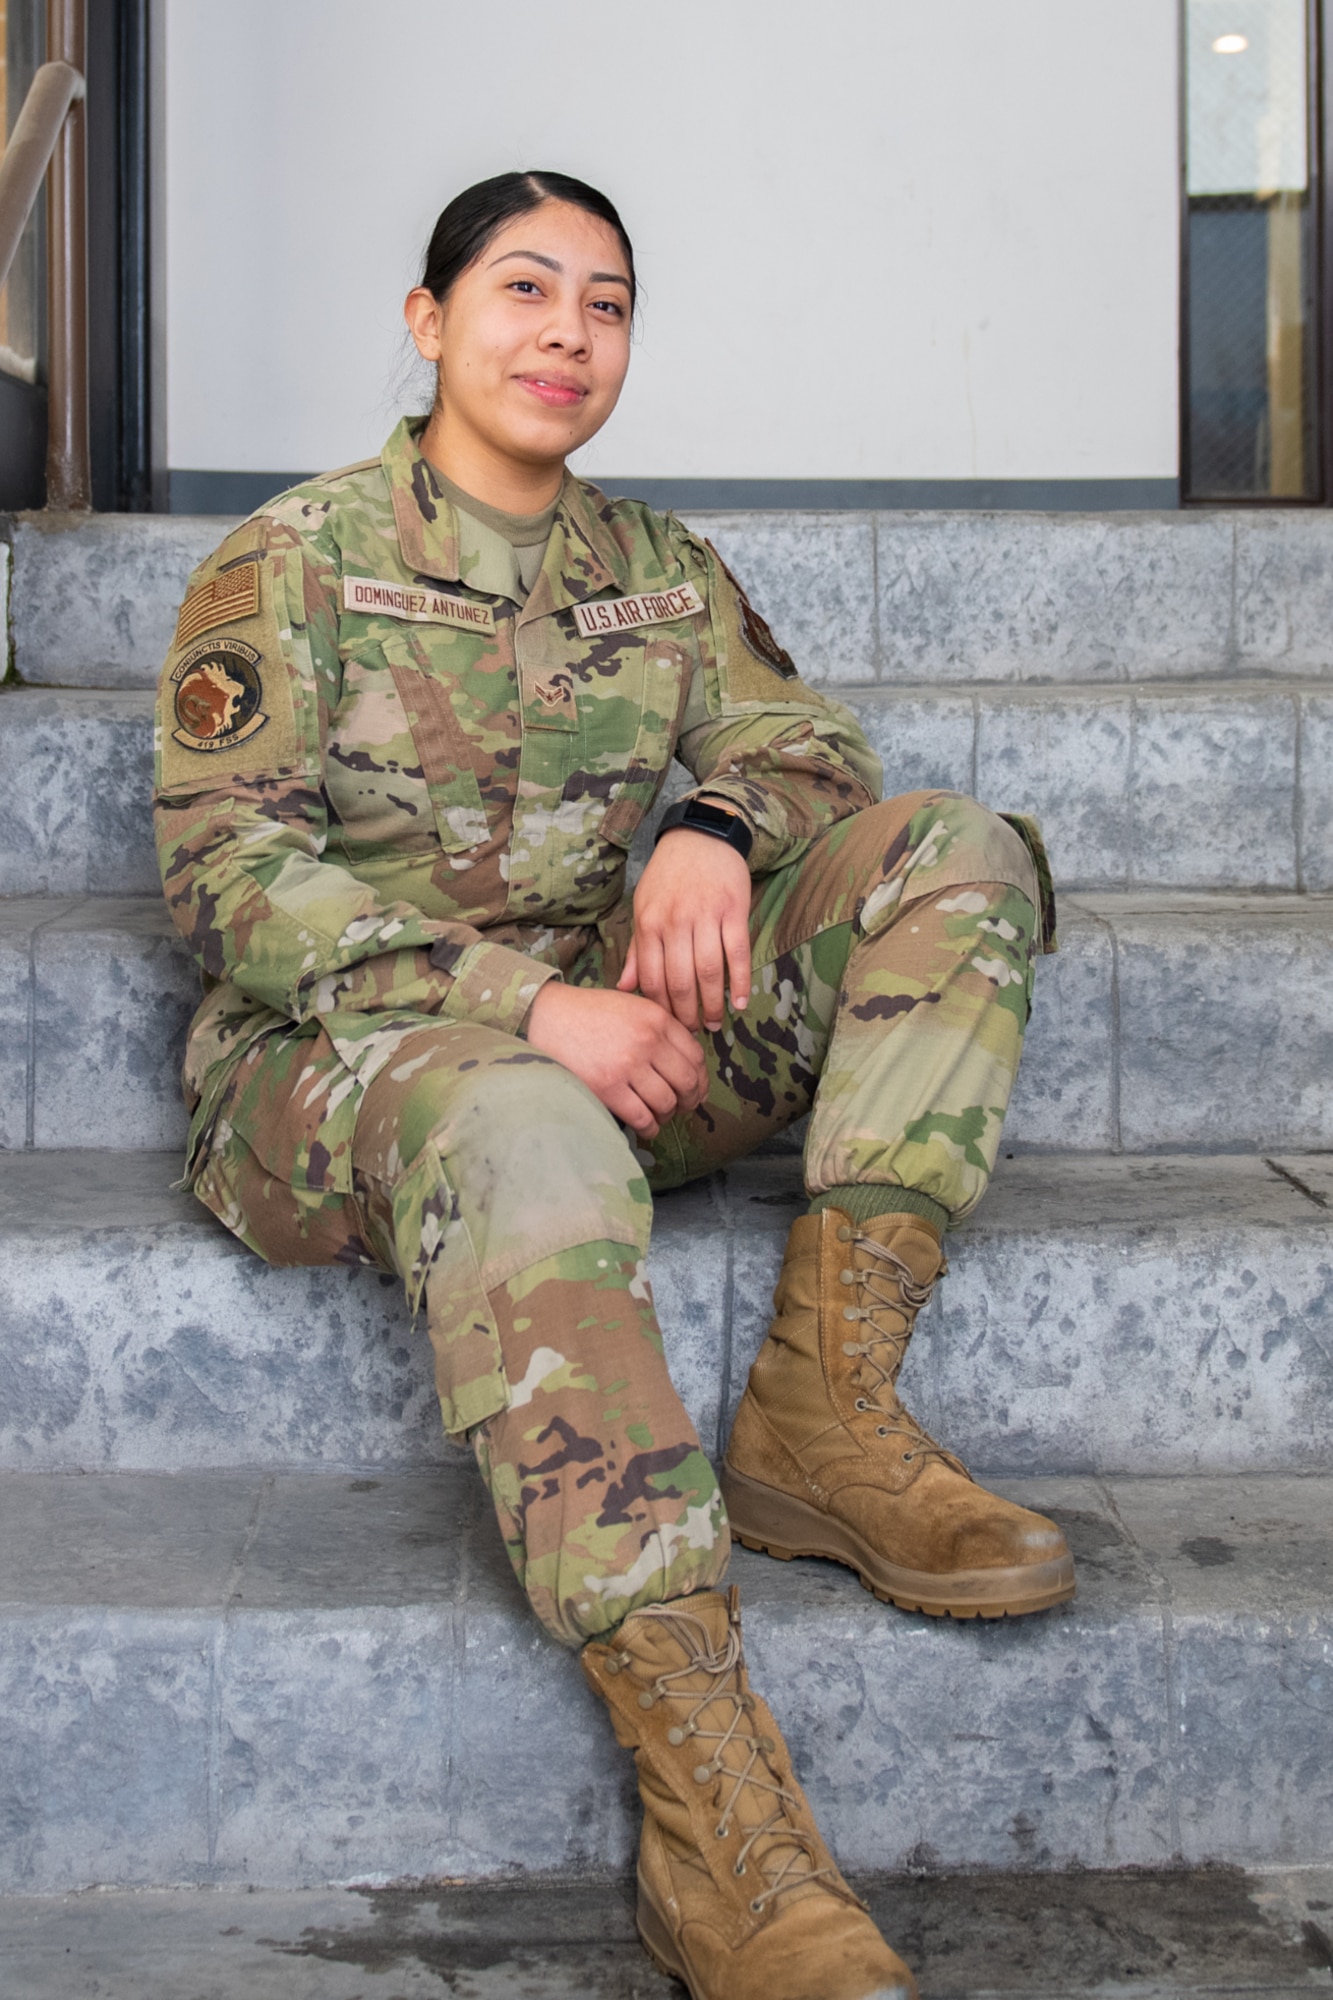 Airman 1st Class Angeles Dominguez Antunez, 419th Sustainment Services Flight, is an Air Force reservist at Hill Air Force Base, Utah.